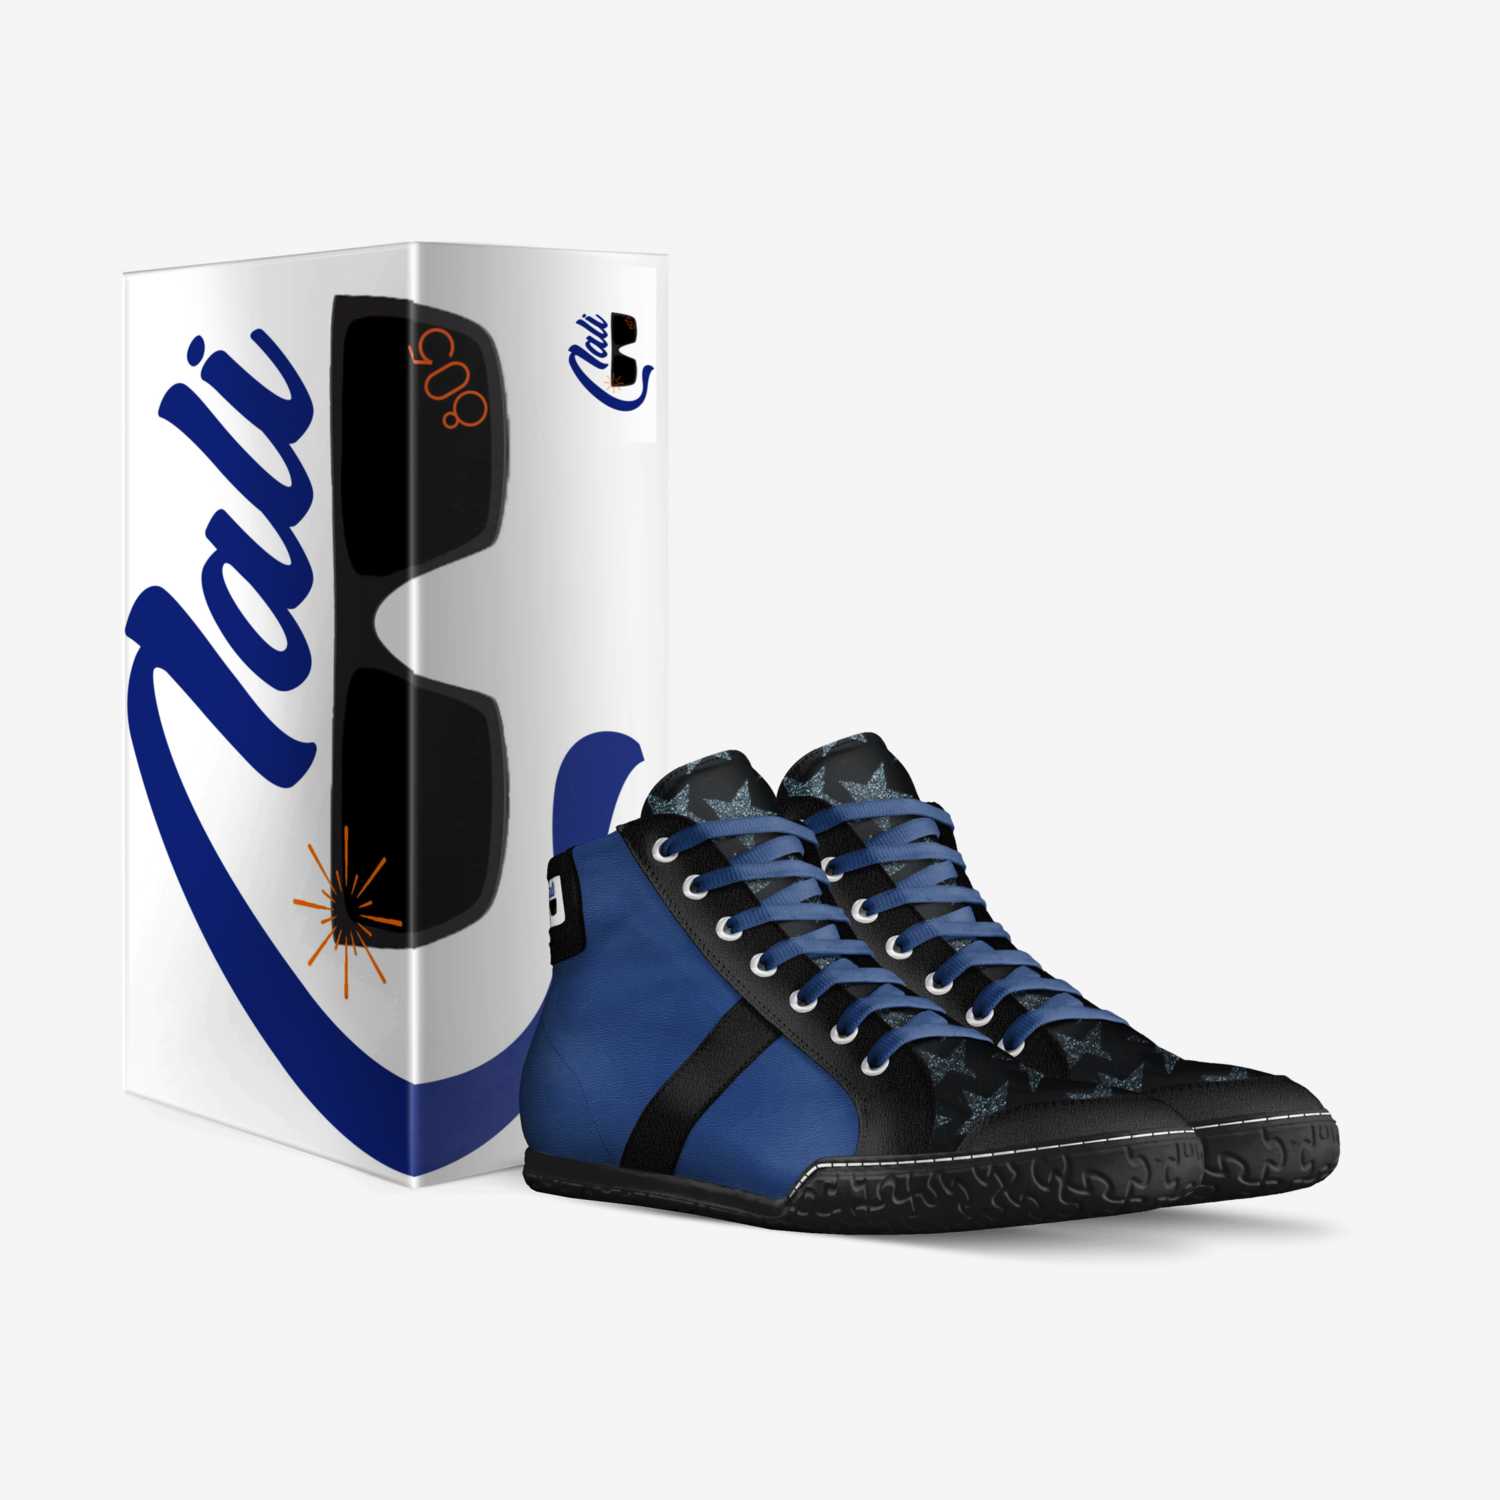 Cali Classic 5 custom made in Italy shoes by Kevin Martin Jr. | Box view